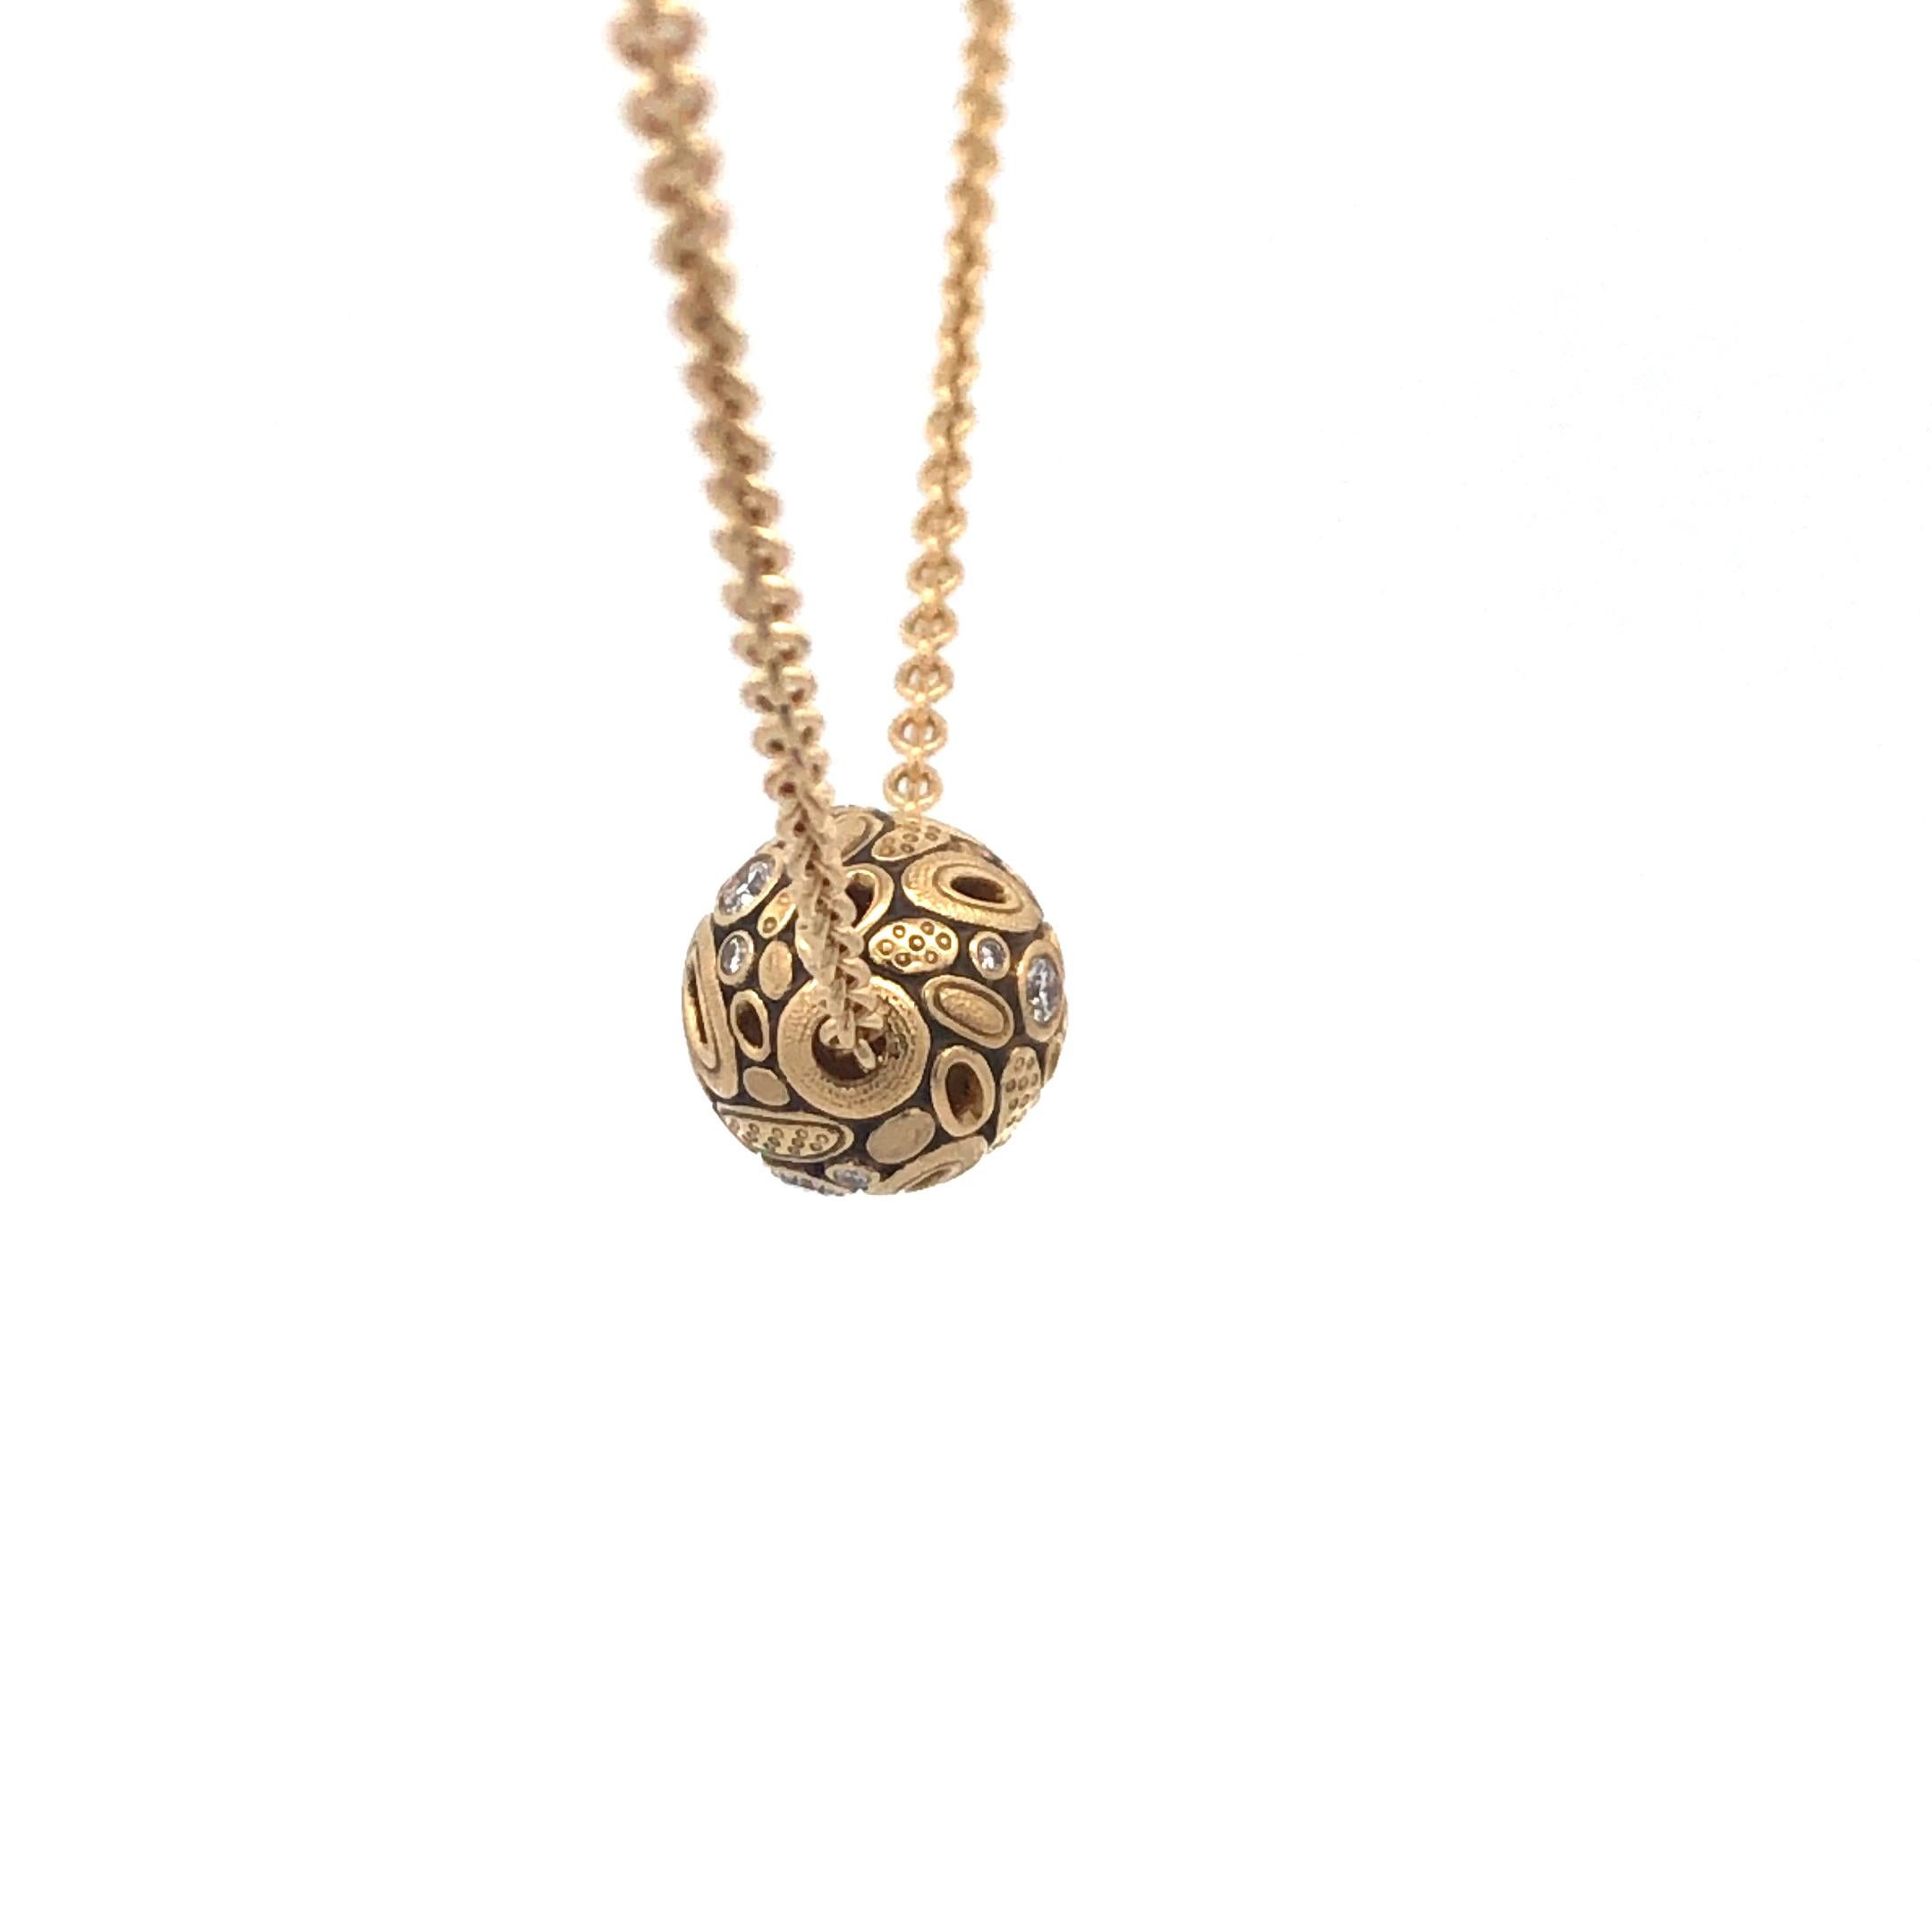 18K Yellow Gold and Diamond 'Open Ovals' Ball Pendant
The pendant features 12 diamonds 0.36ctw 
on 18K, 18